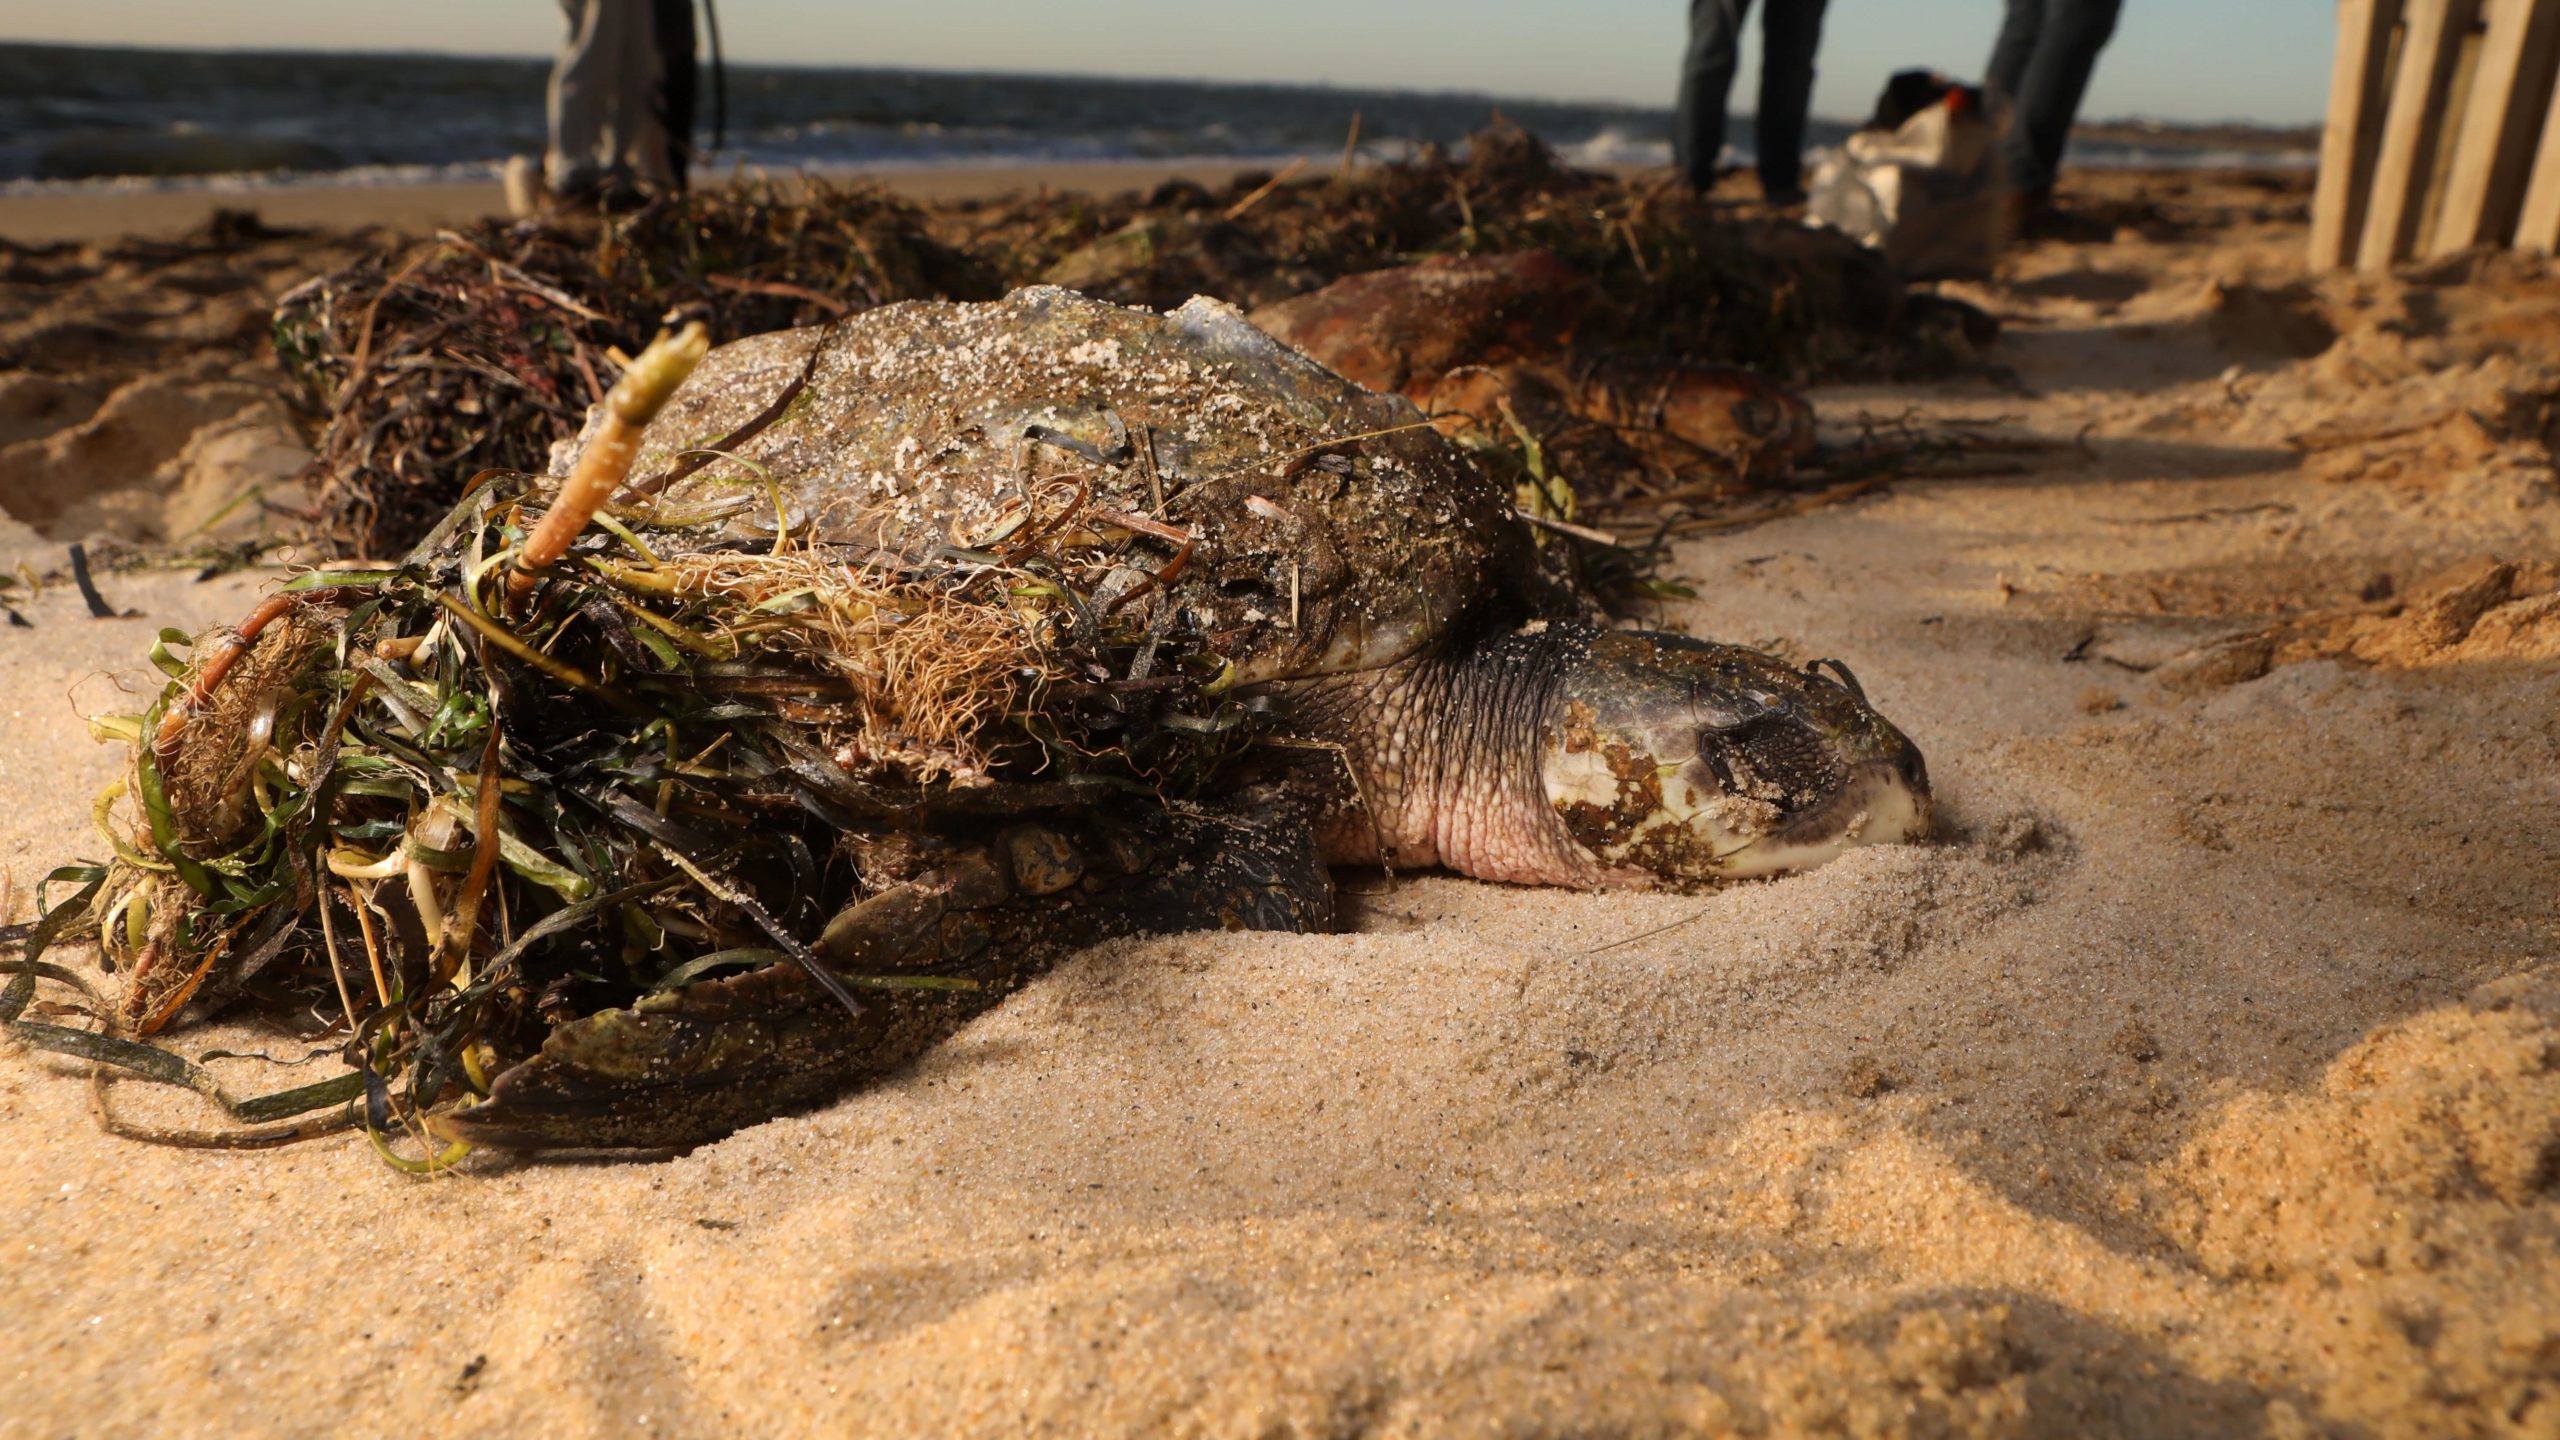 A cold-stunned Kemp's ridley sea turtle lays in the sand with seaweed piled on top of it to keep it warm before the arrival of people from Mass Audubon on the scene at Great Hallow beach in Cape Cod on Dec. 3, 2020. (Photo: Lauren Owens Lambert / AFP, Getty Images)